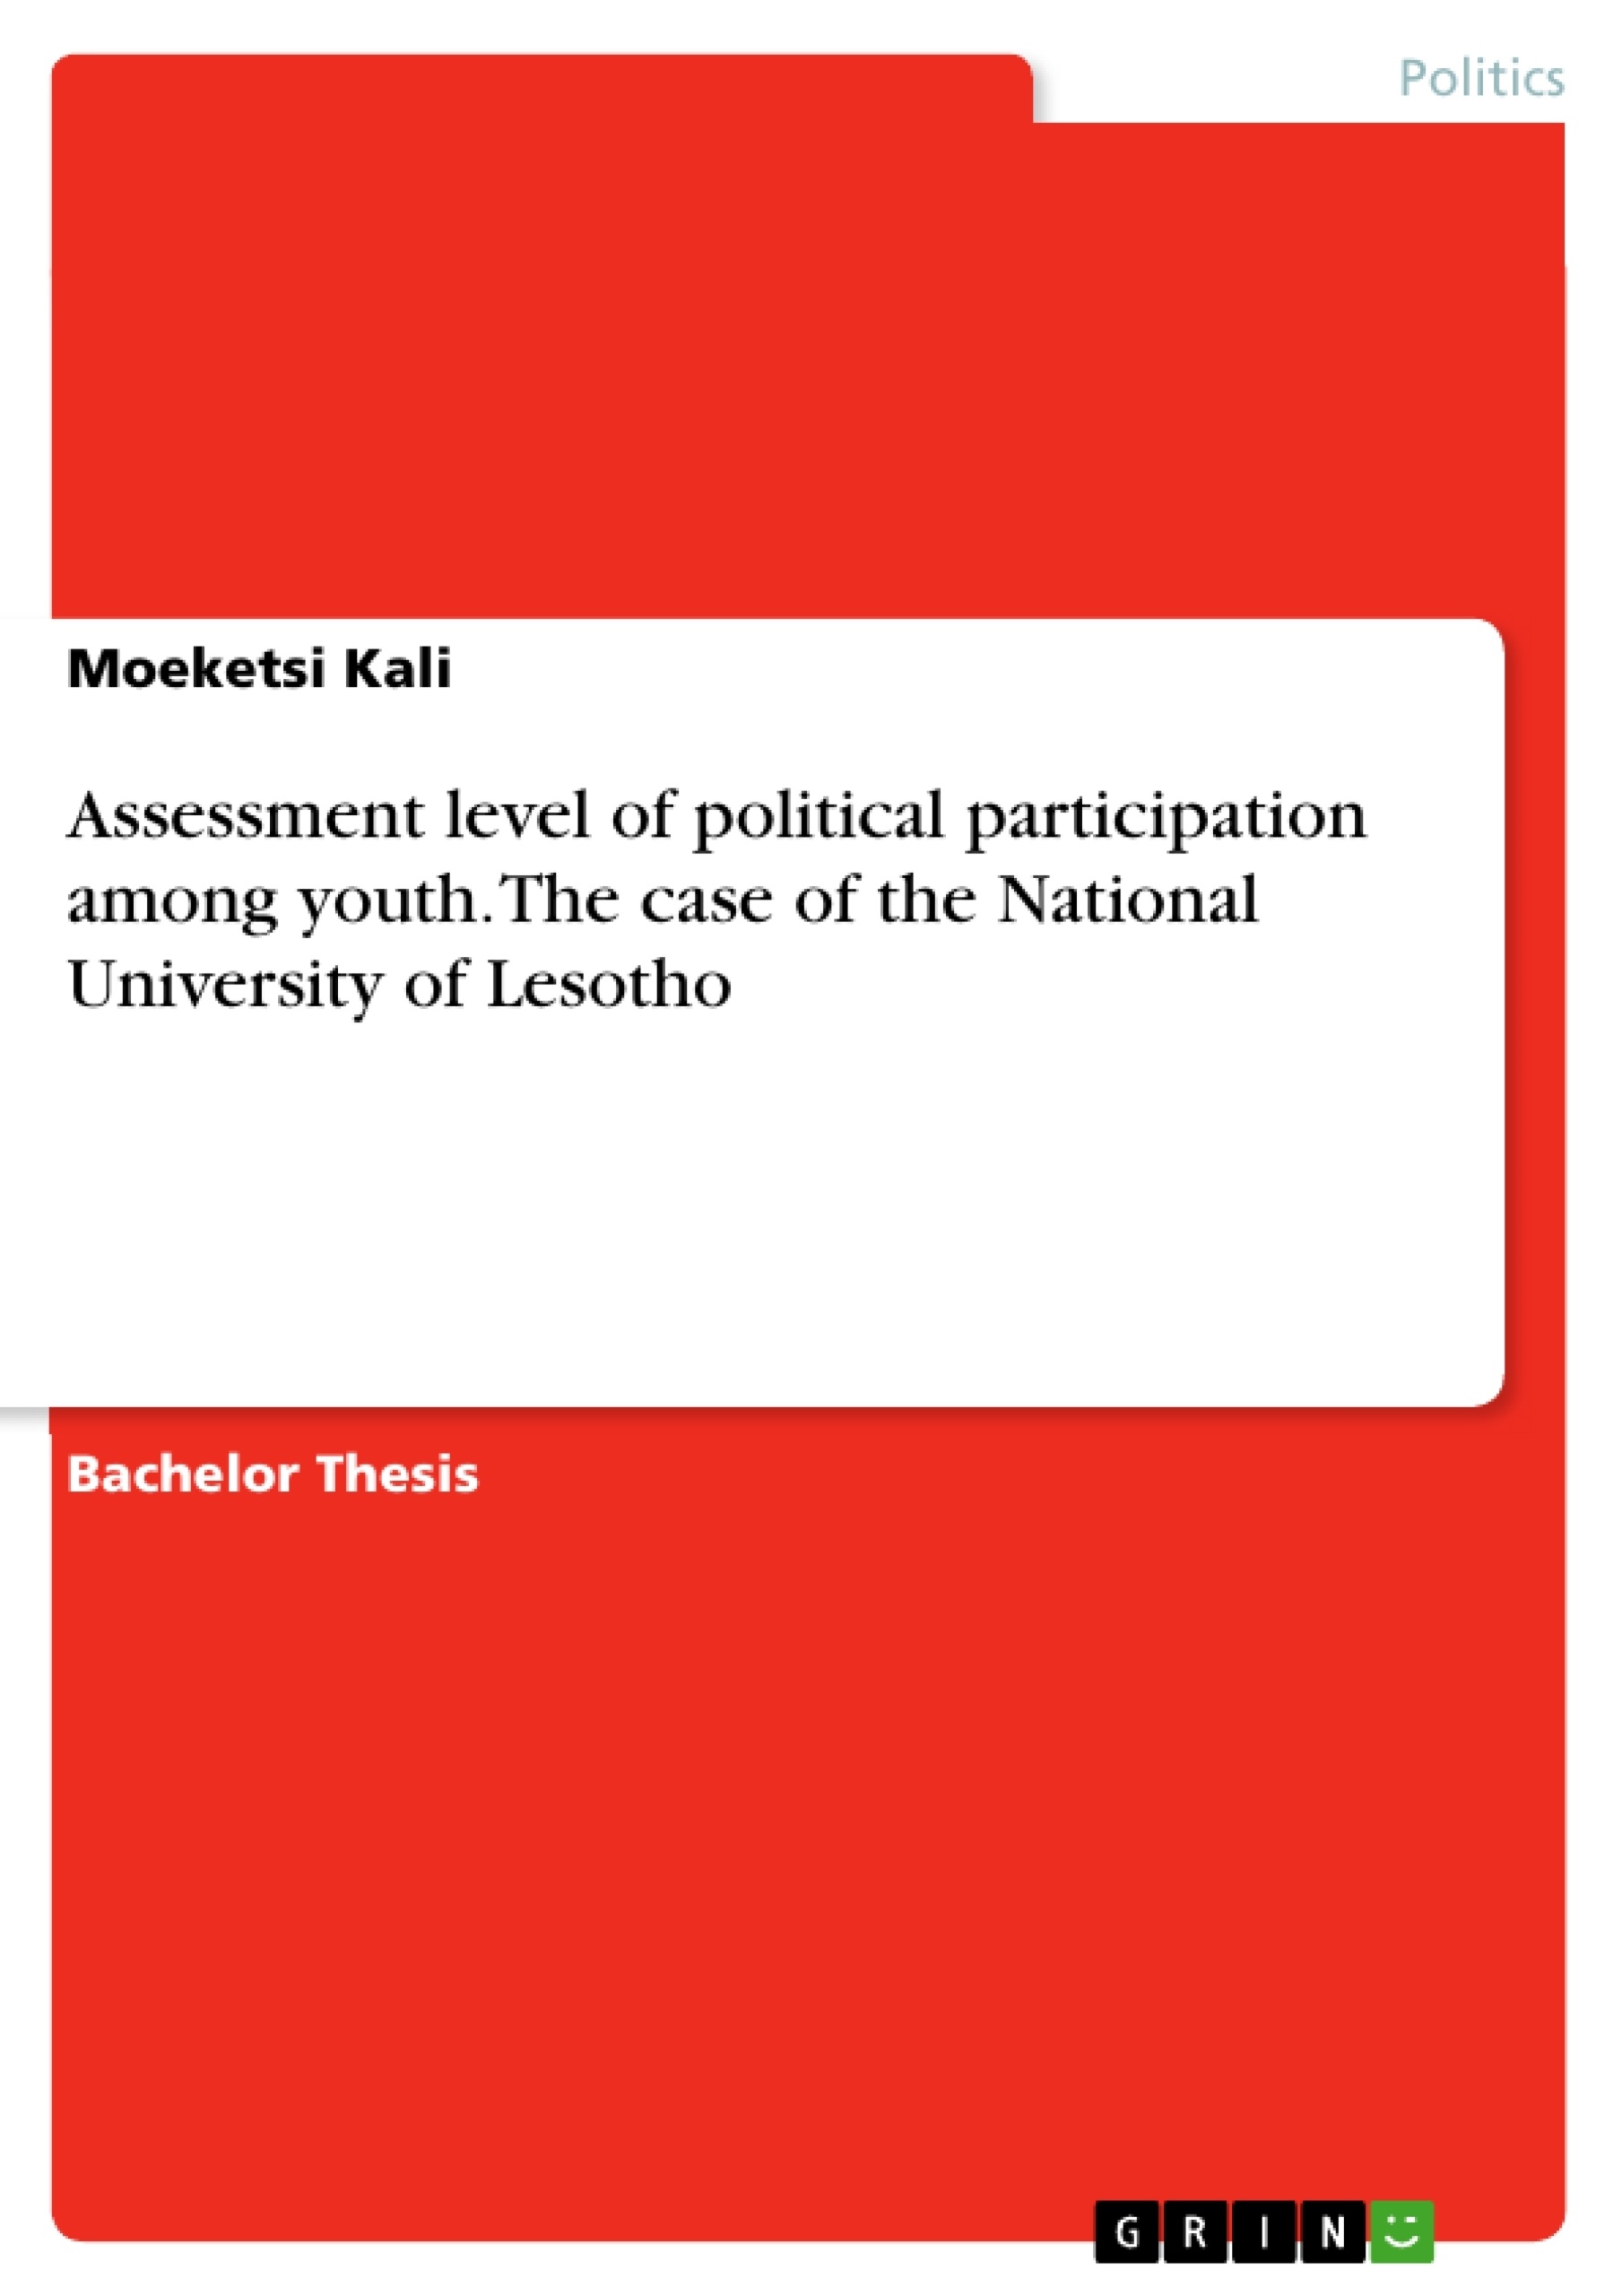 Title: Assessment level of political participation among youth. The case of the National University of Lesotho